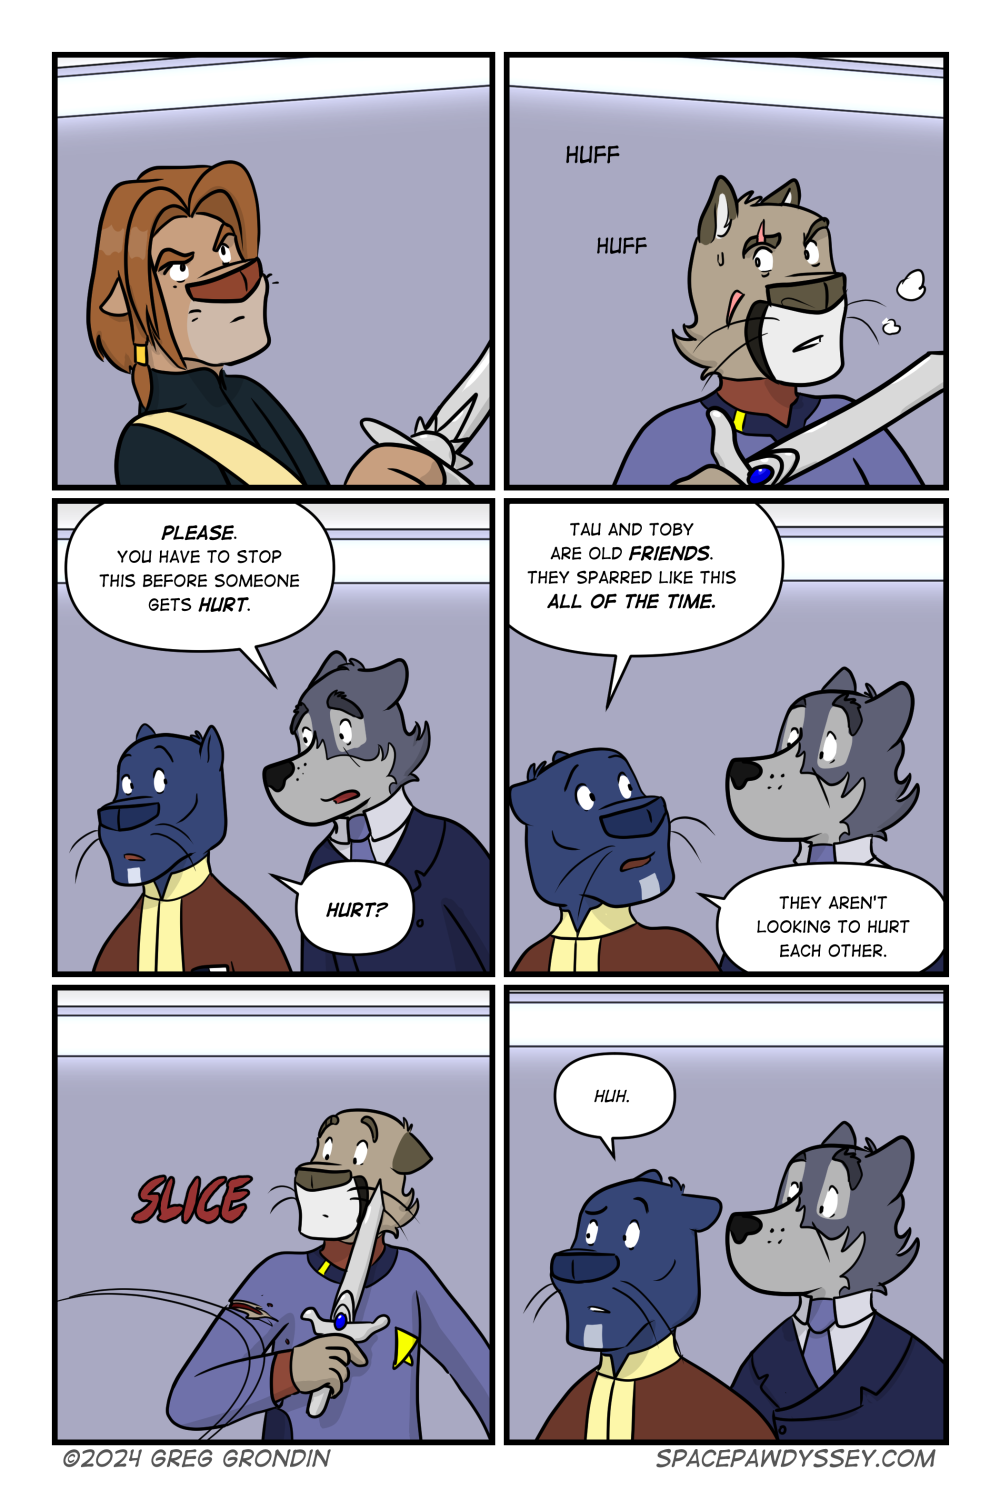 Space Pawdyssey #678